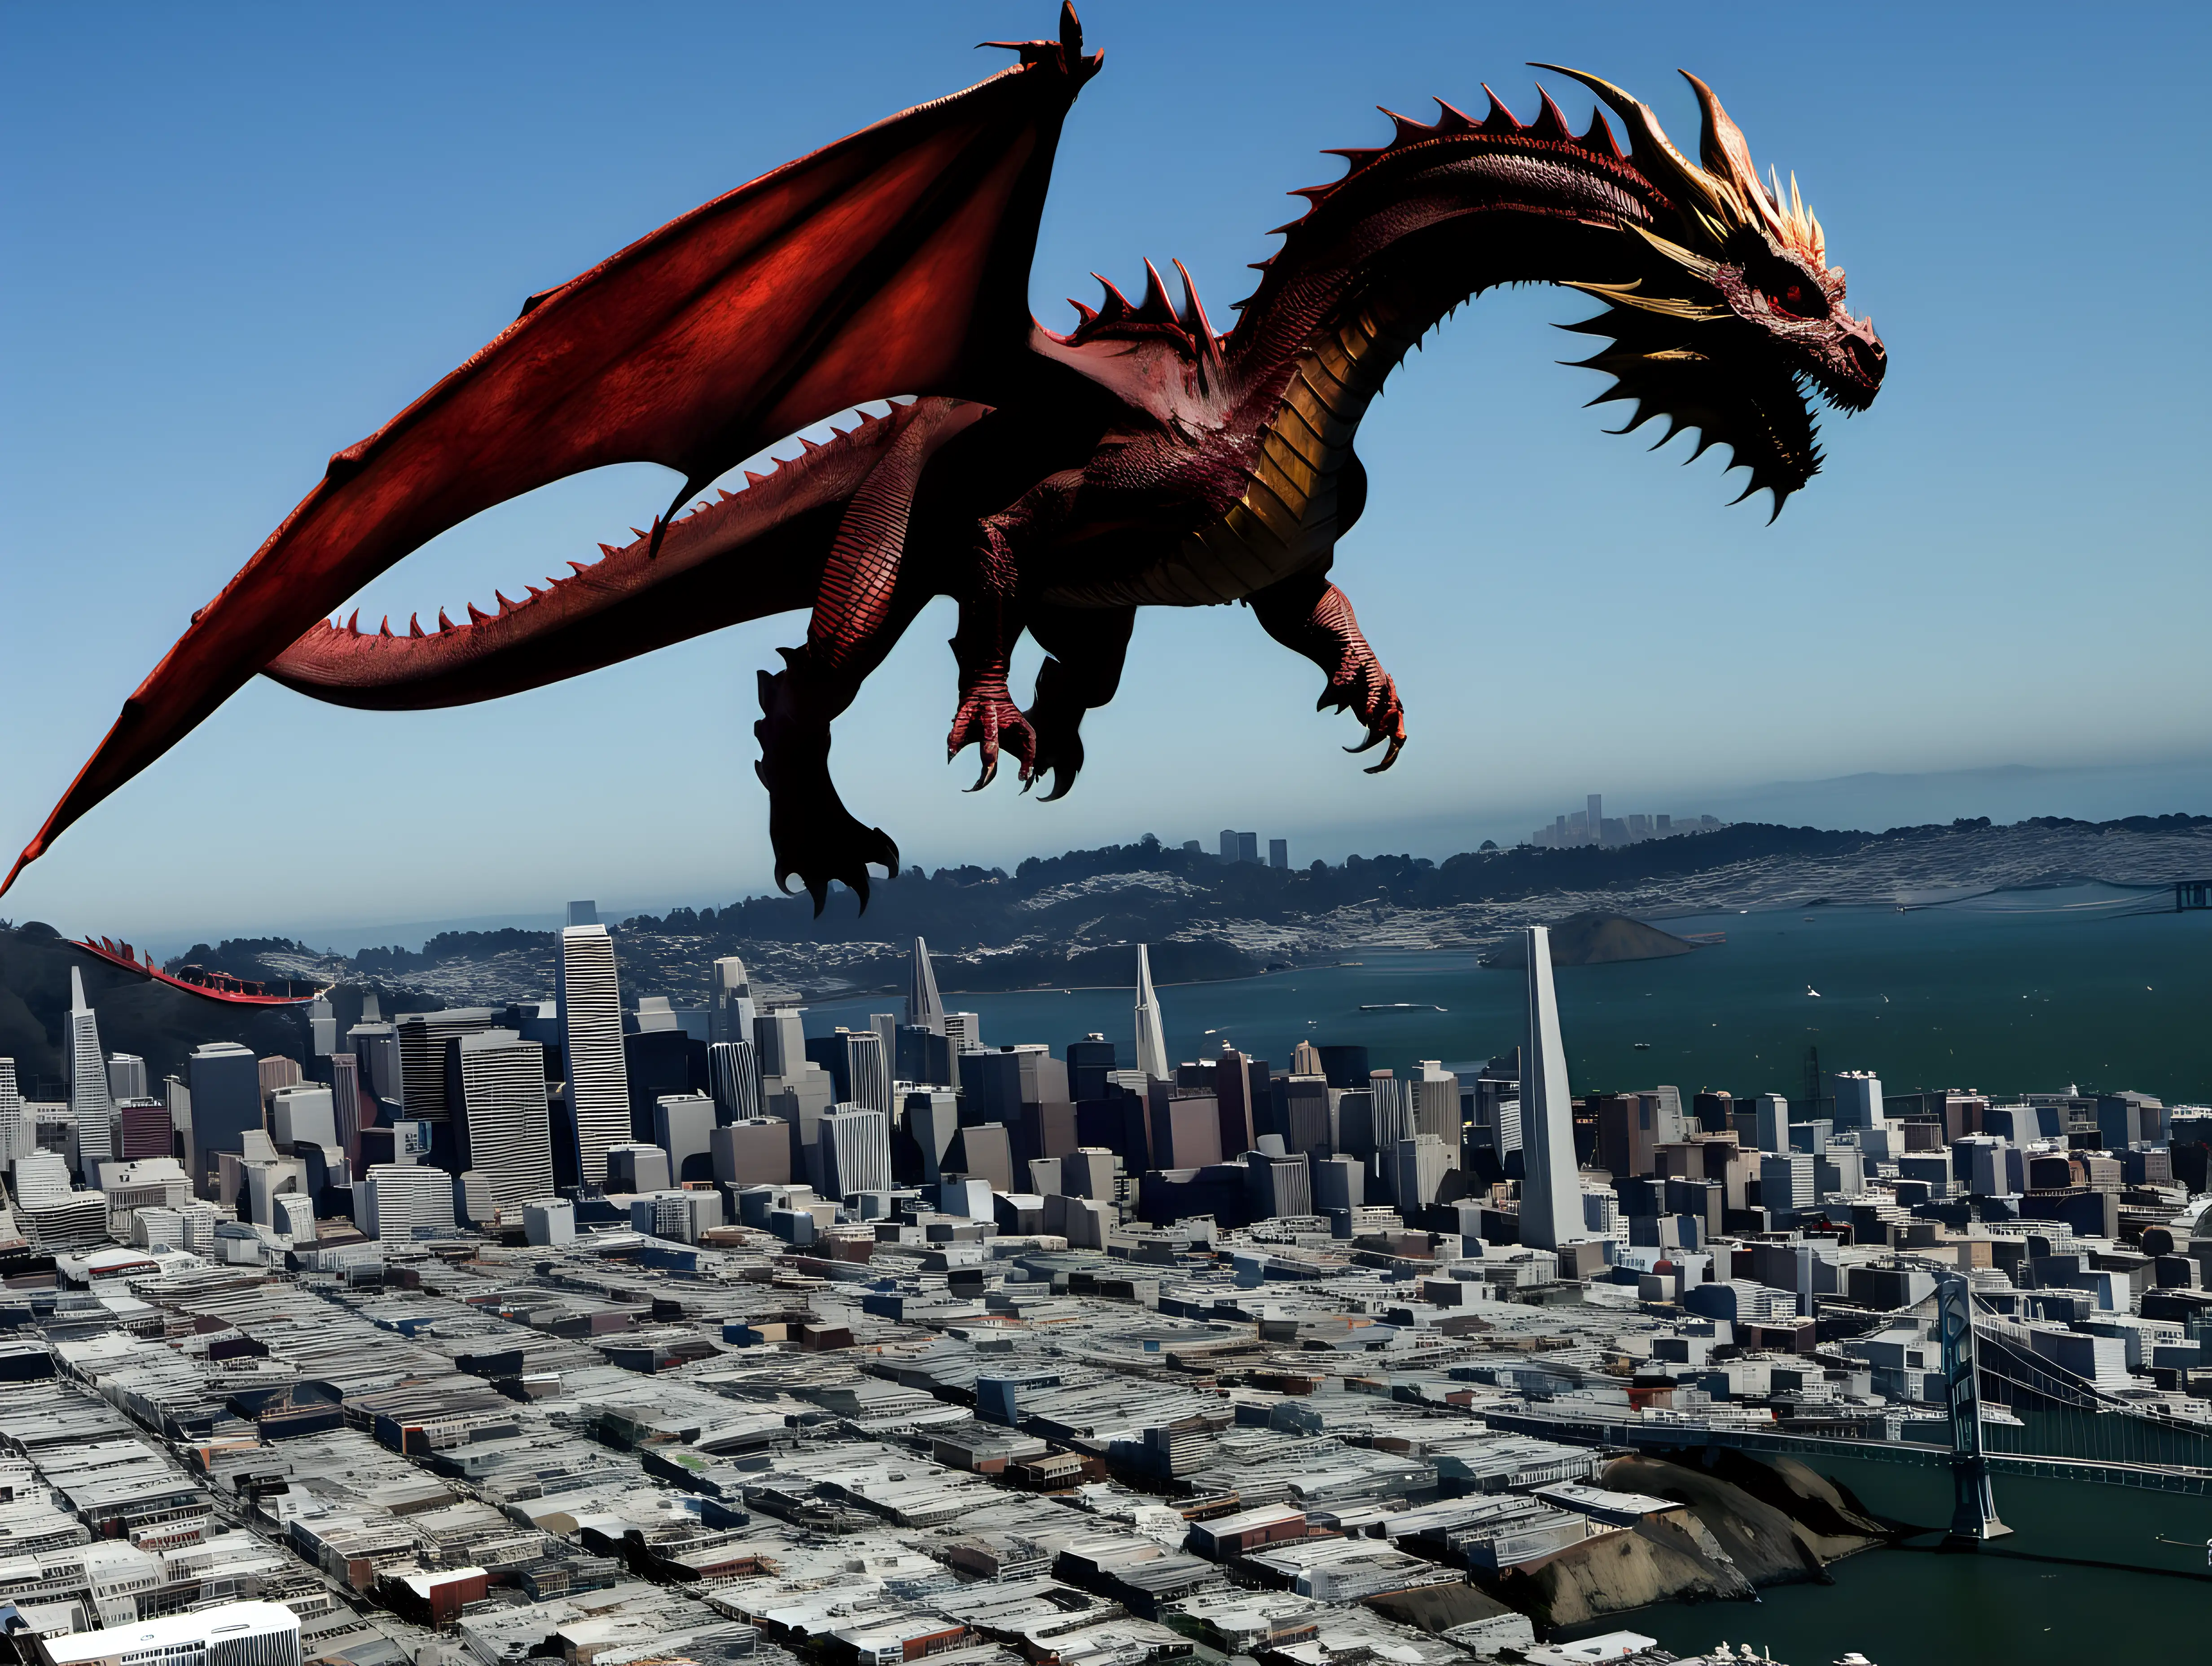 Majestic Dragons Descend Upon San Francisco in the Age of Flight